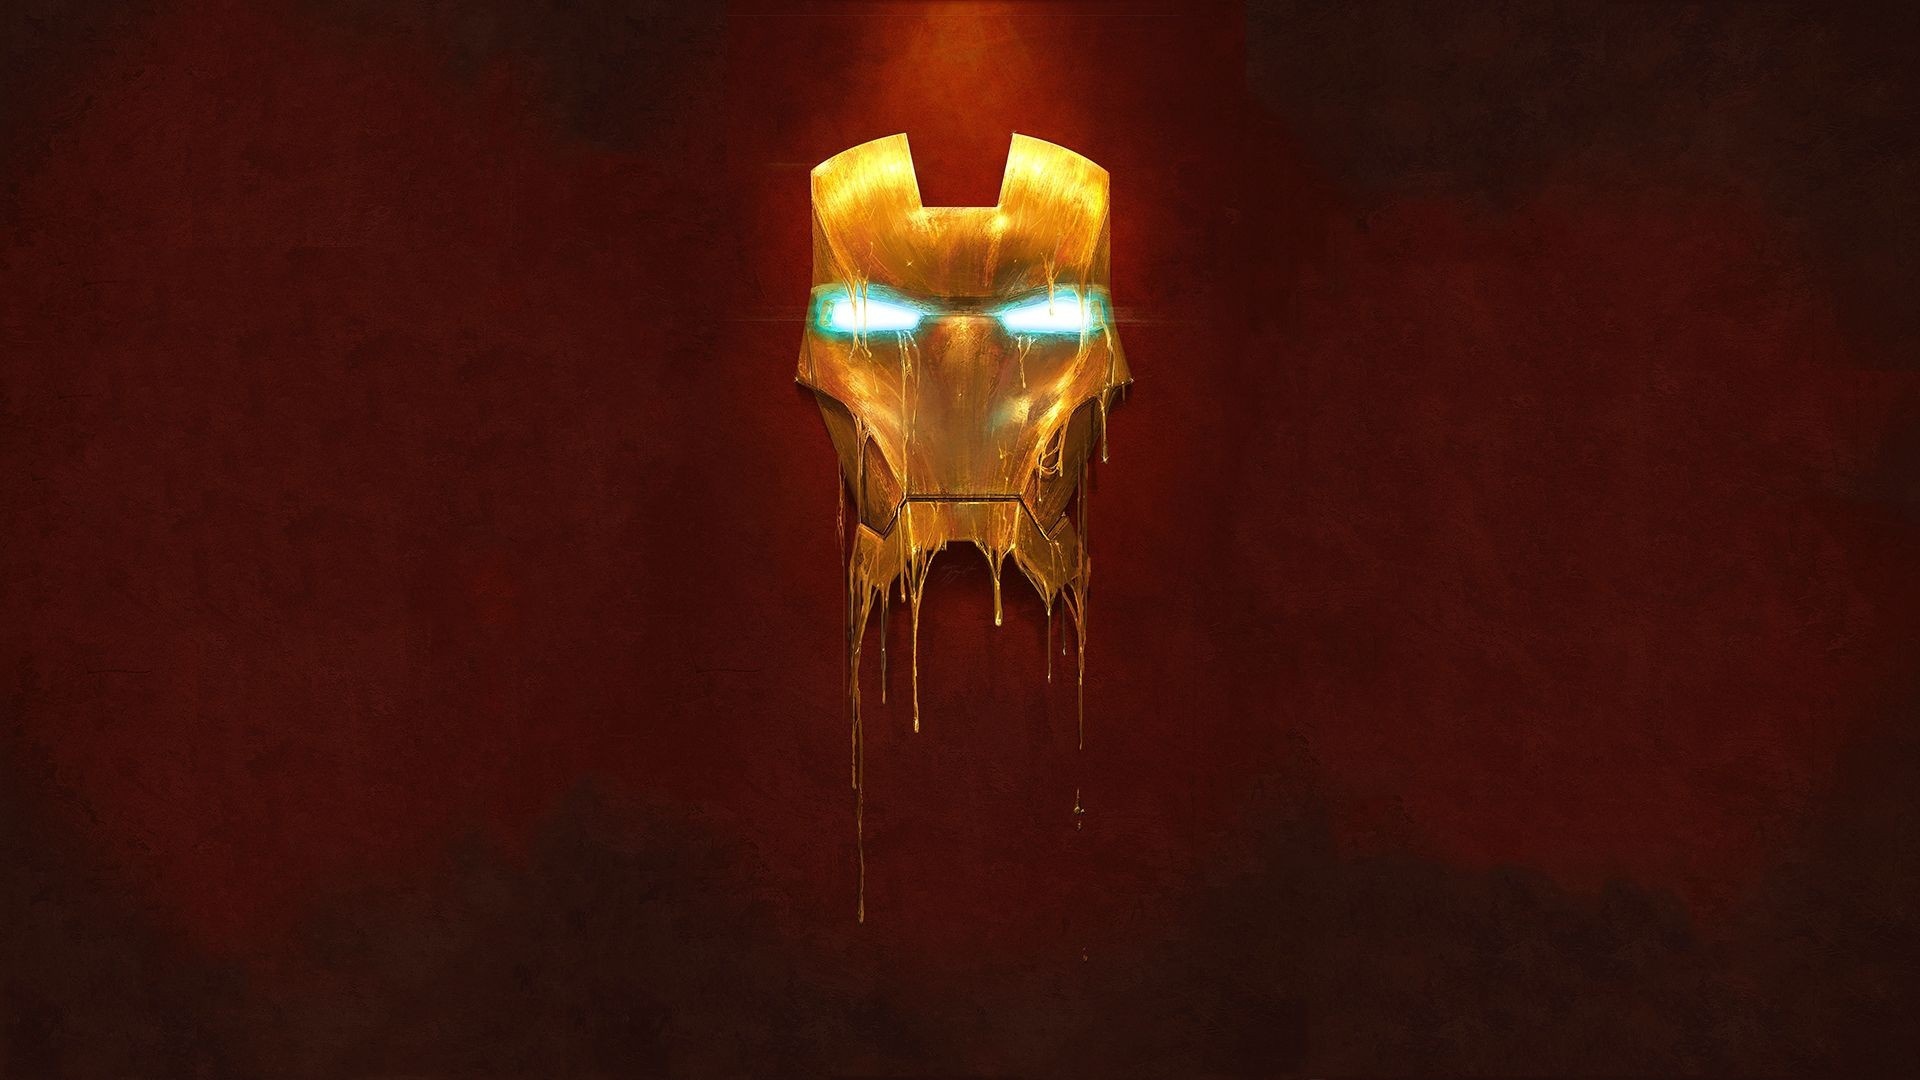 38132 download wallpaper iron man, cinema, background, red screensavers and pictures for free